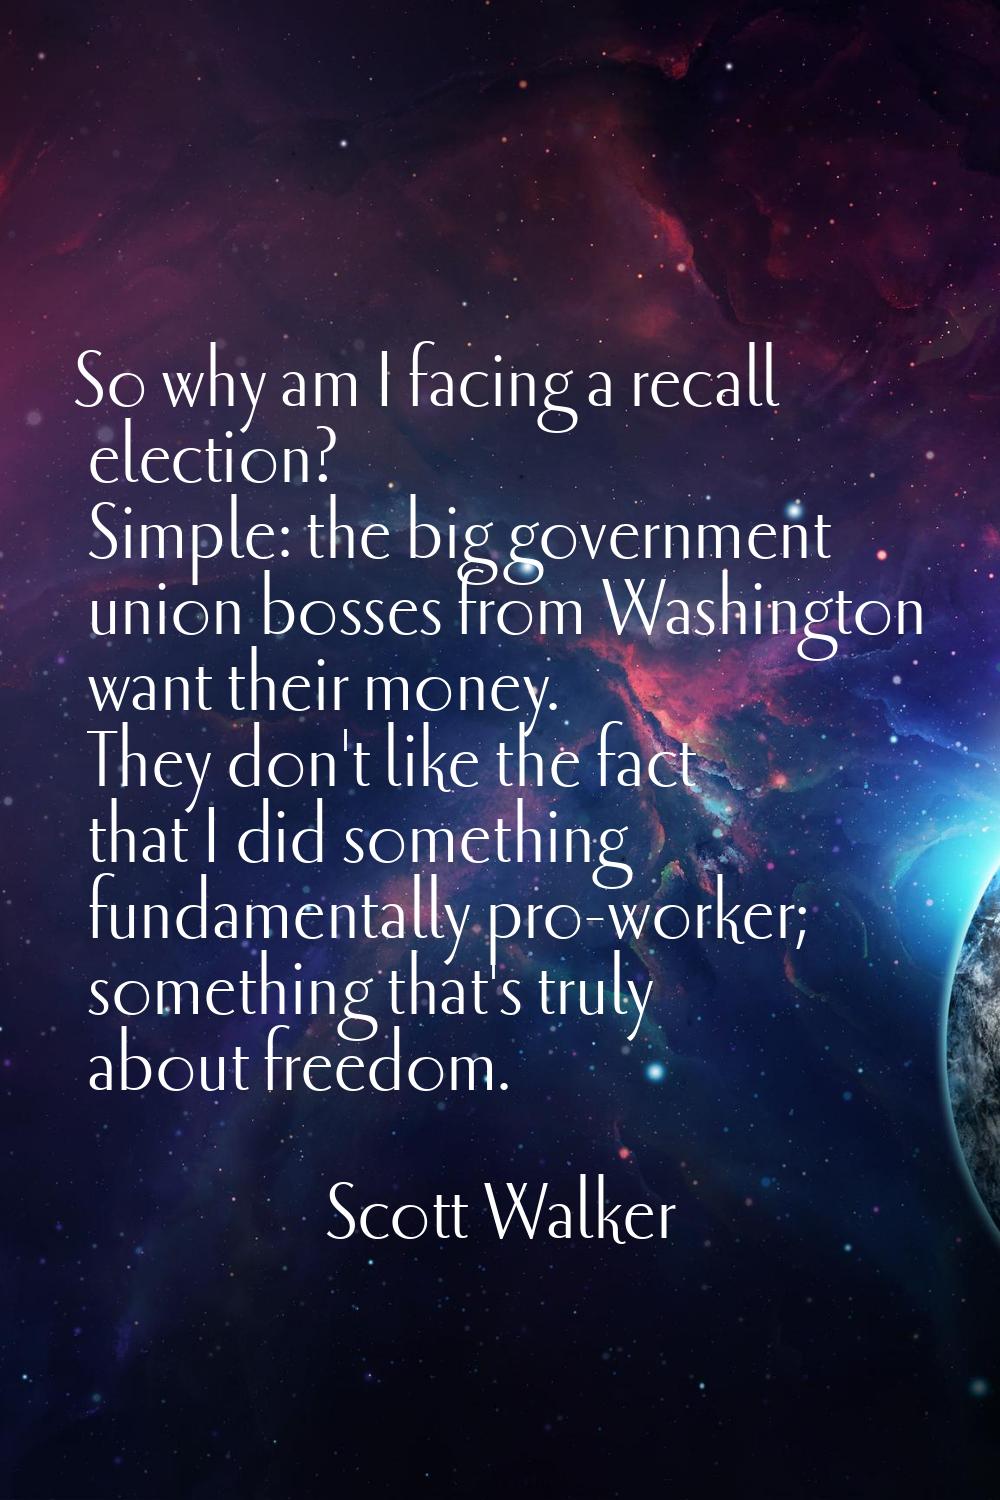 So why am I facing a recall election? Simple: the big government union bosses from Washington want 